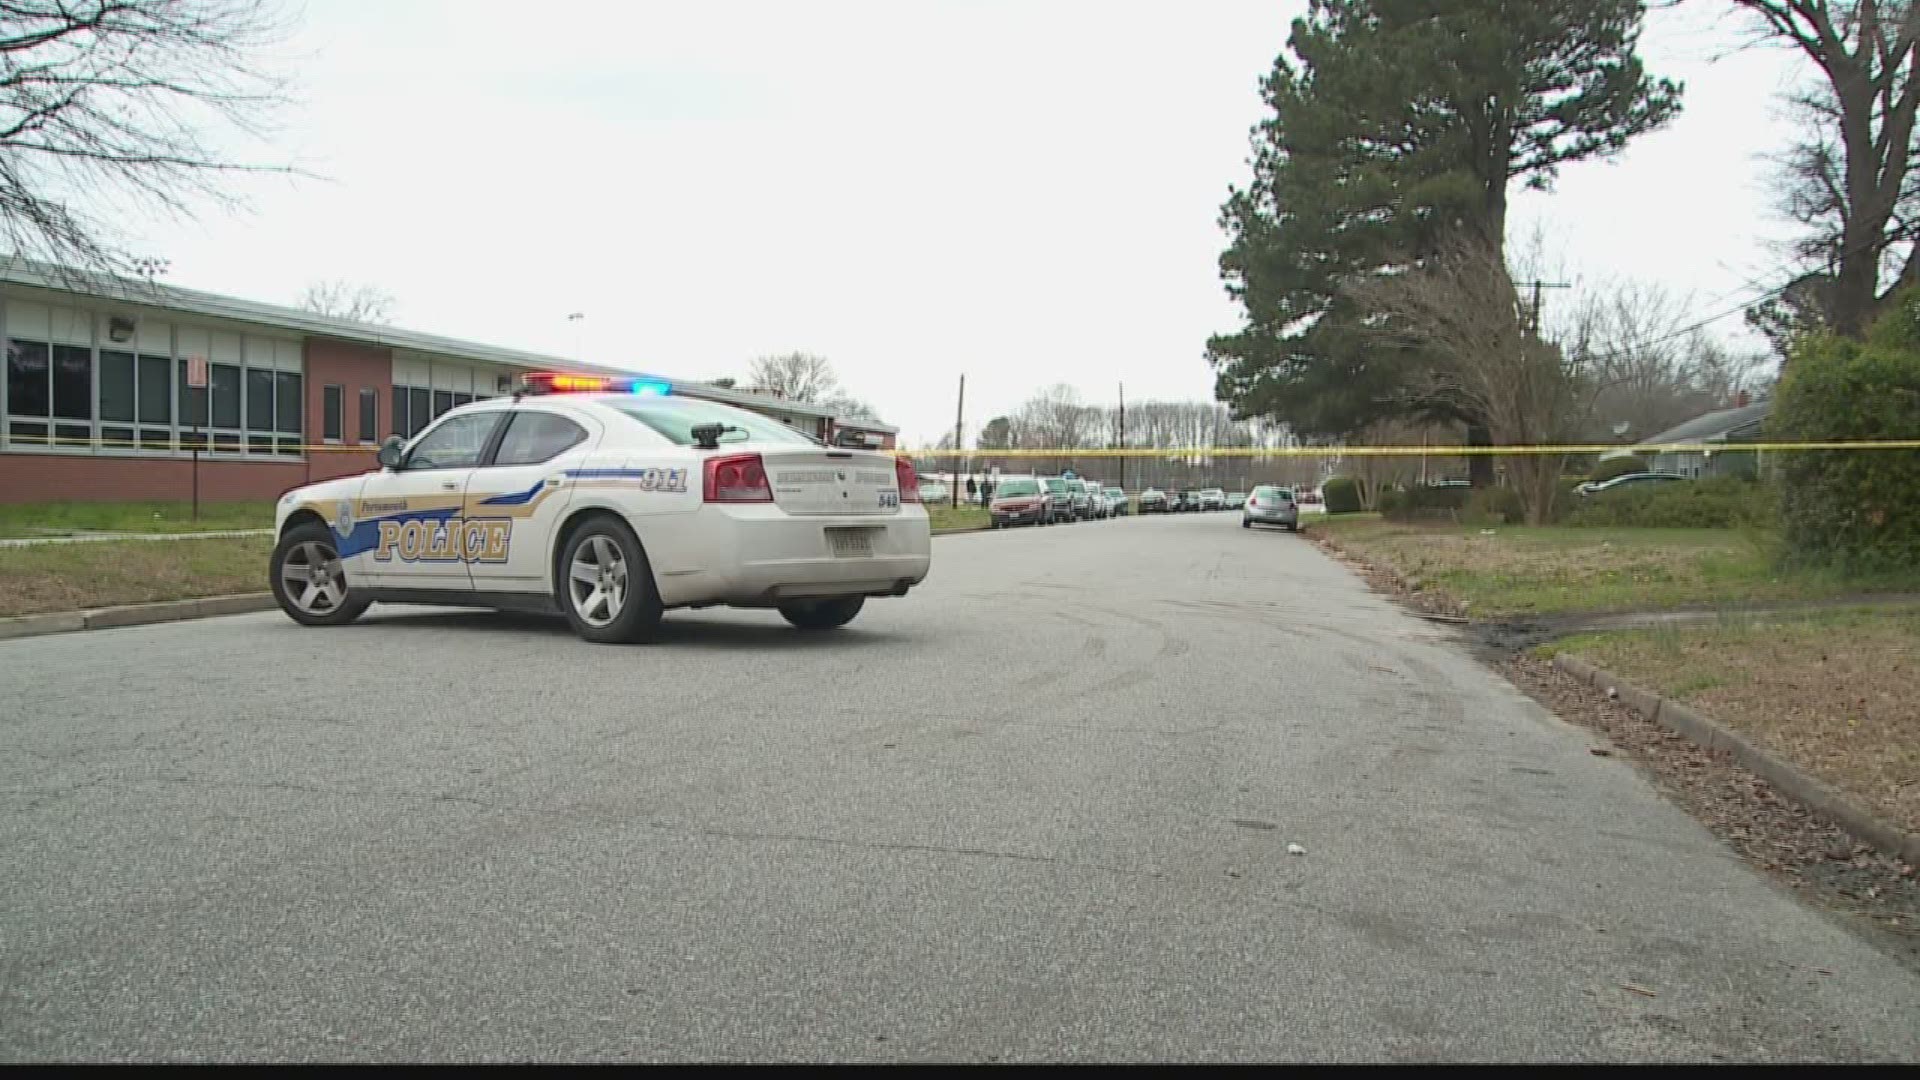 13News Now Elise Brown has the latest developments surrounding the case where a parent was shot during school dismissal at Douglass Elementary School in Portsmouth.